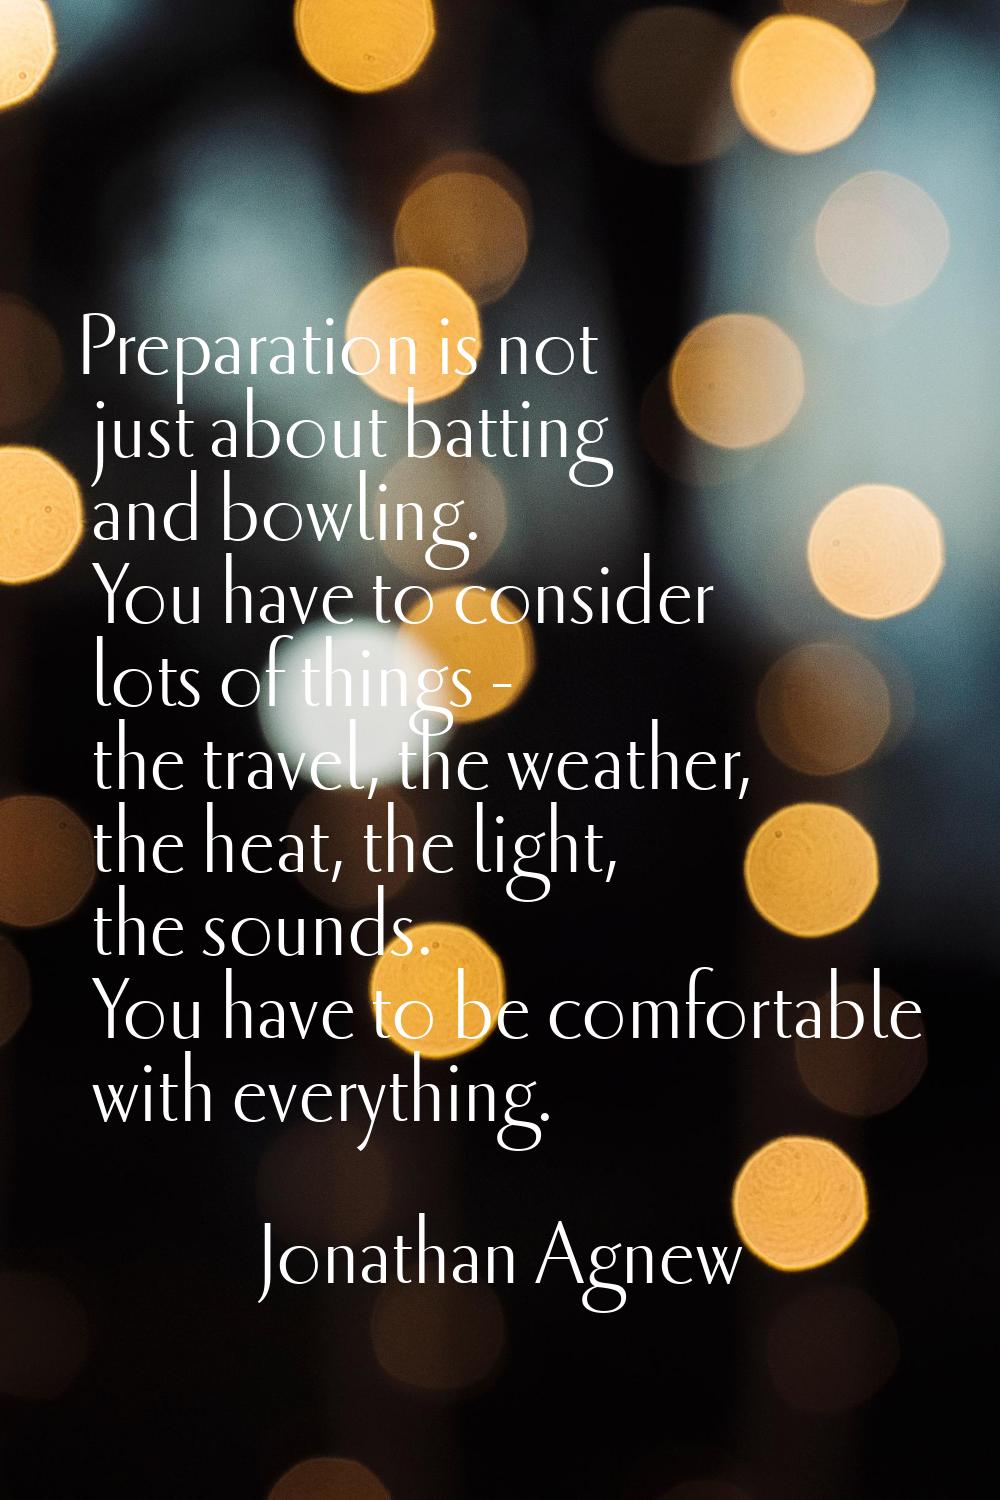 Preparation is not just about batting and bowling. You have to consider lots of things - the travel